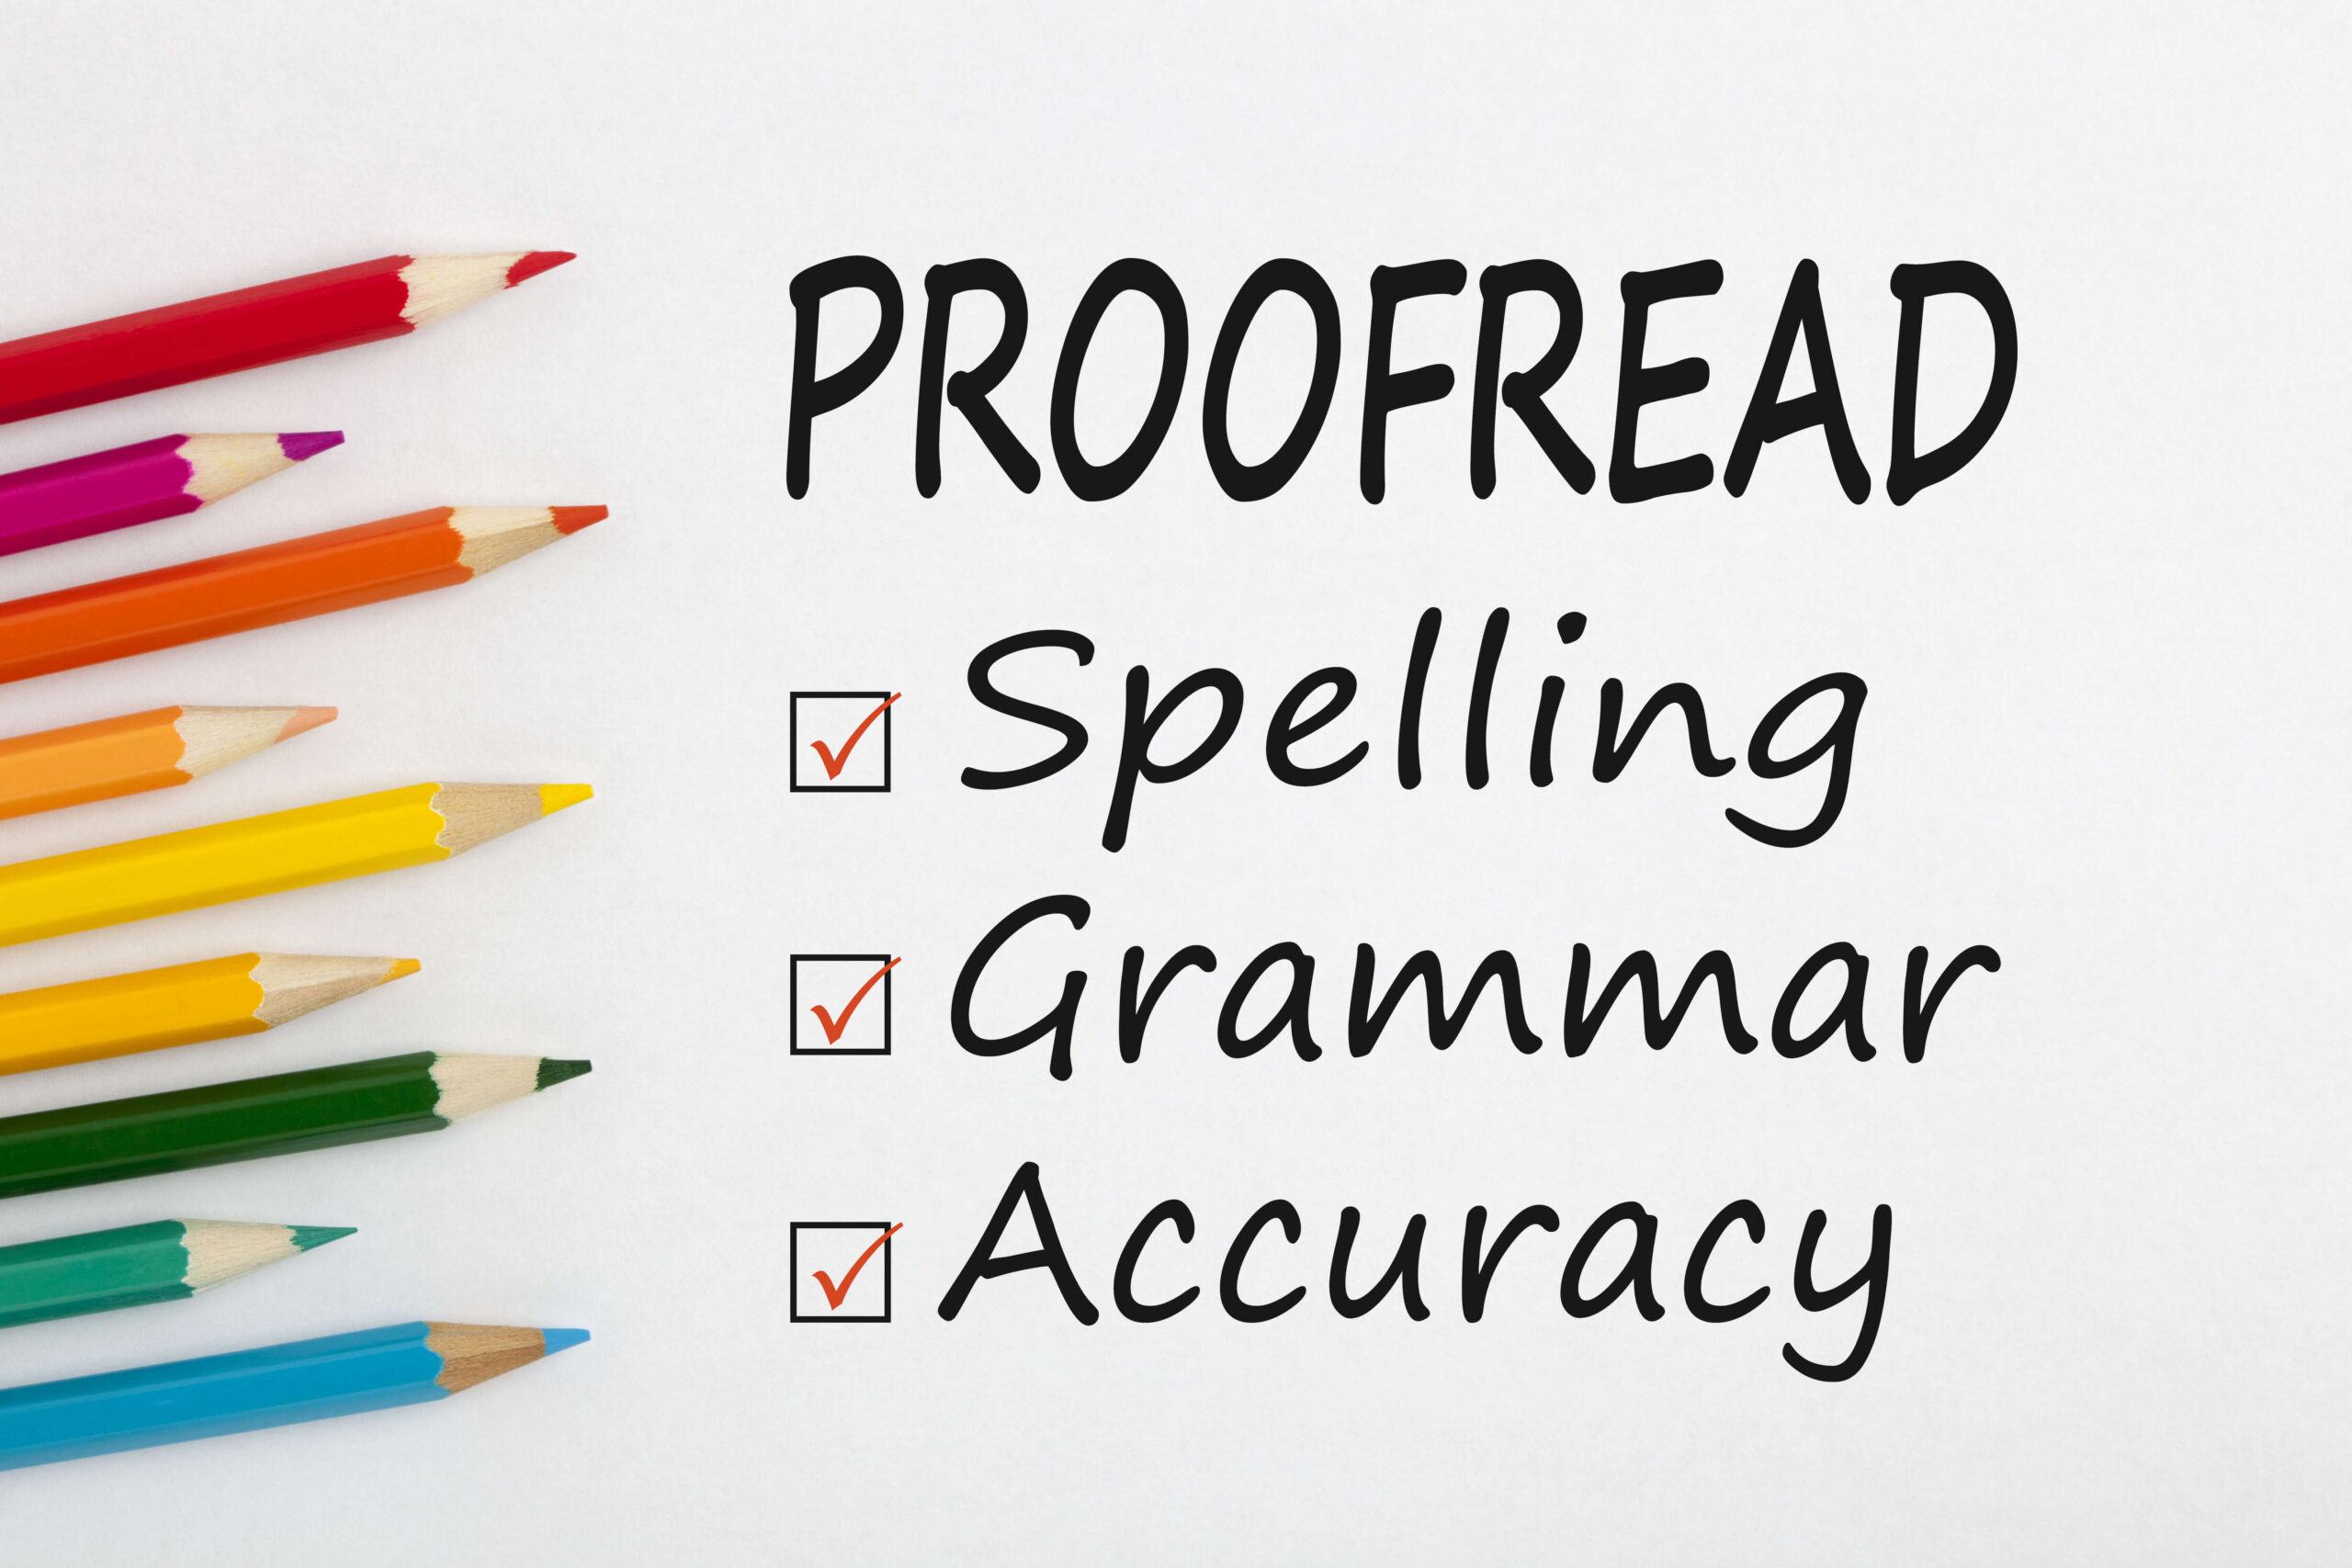 Proofreading image with the words spelling, grammar and accuracy with a red tick.